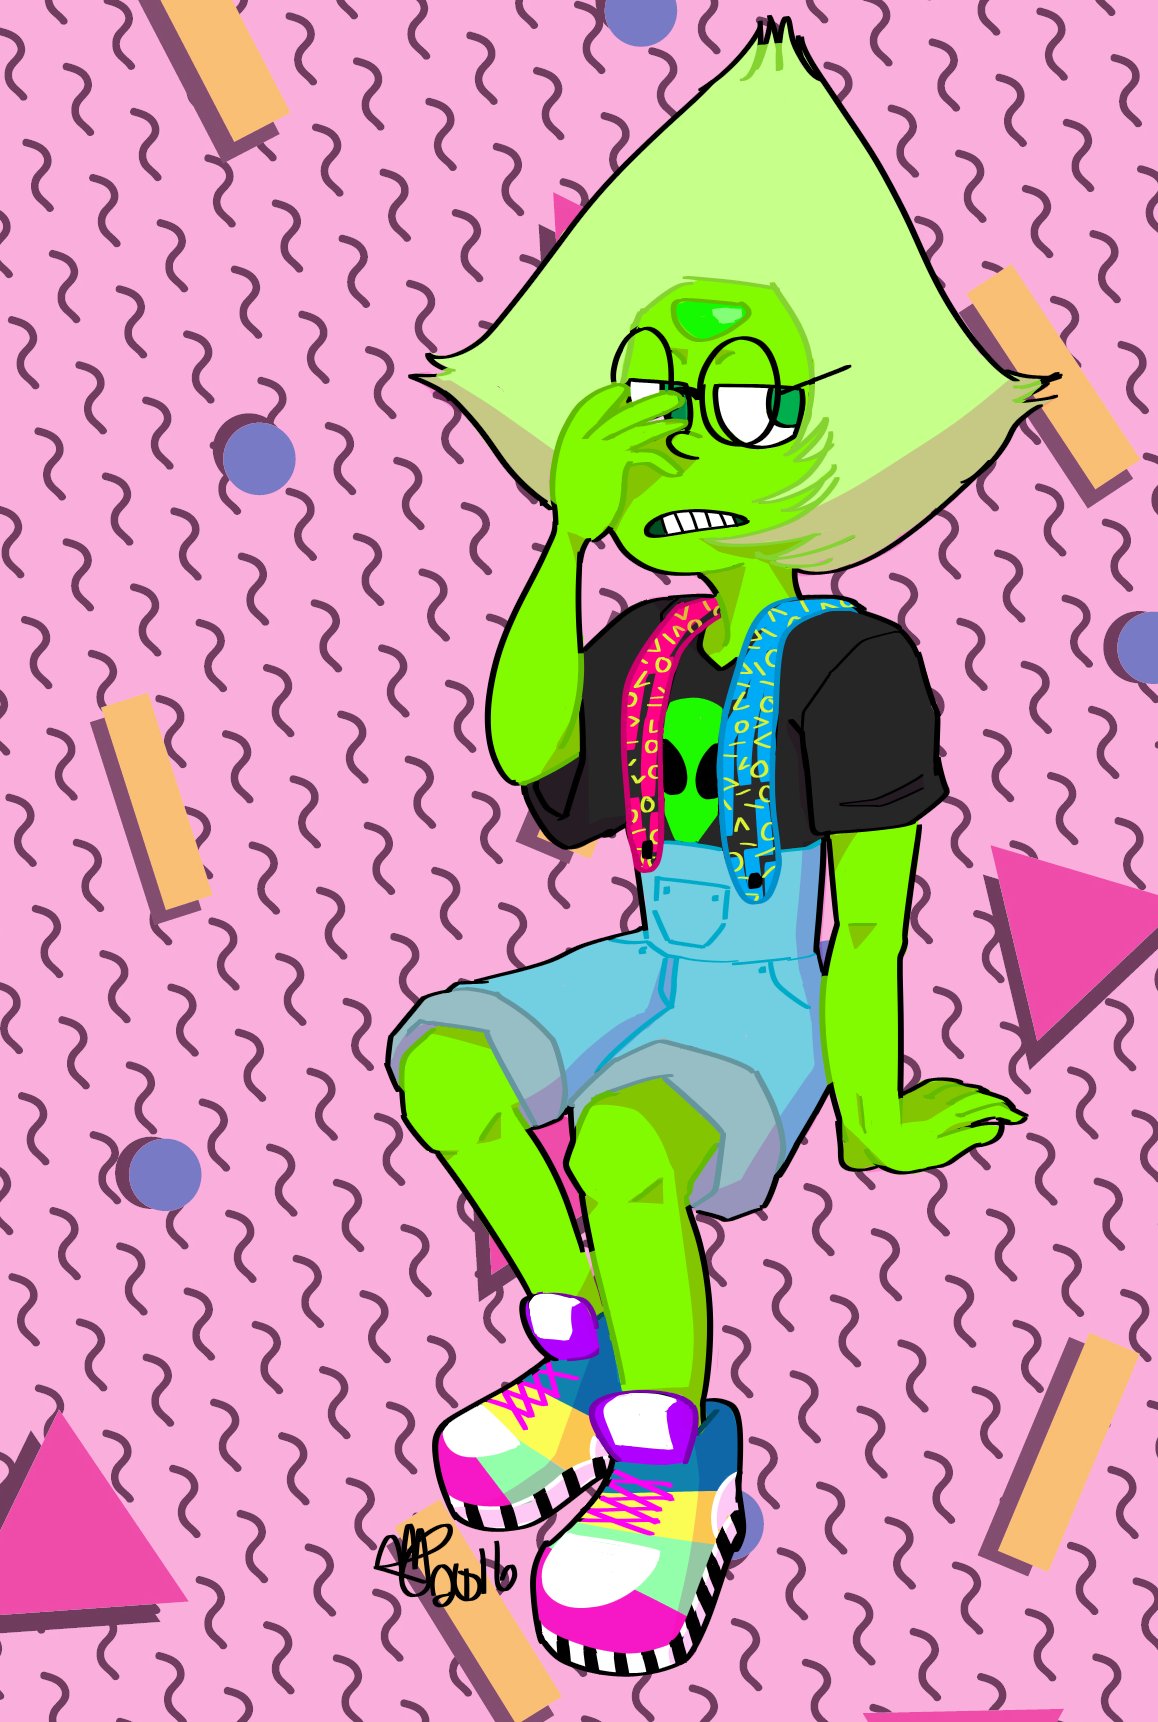 “its called aesthetic, steven”